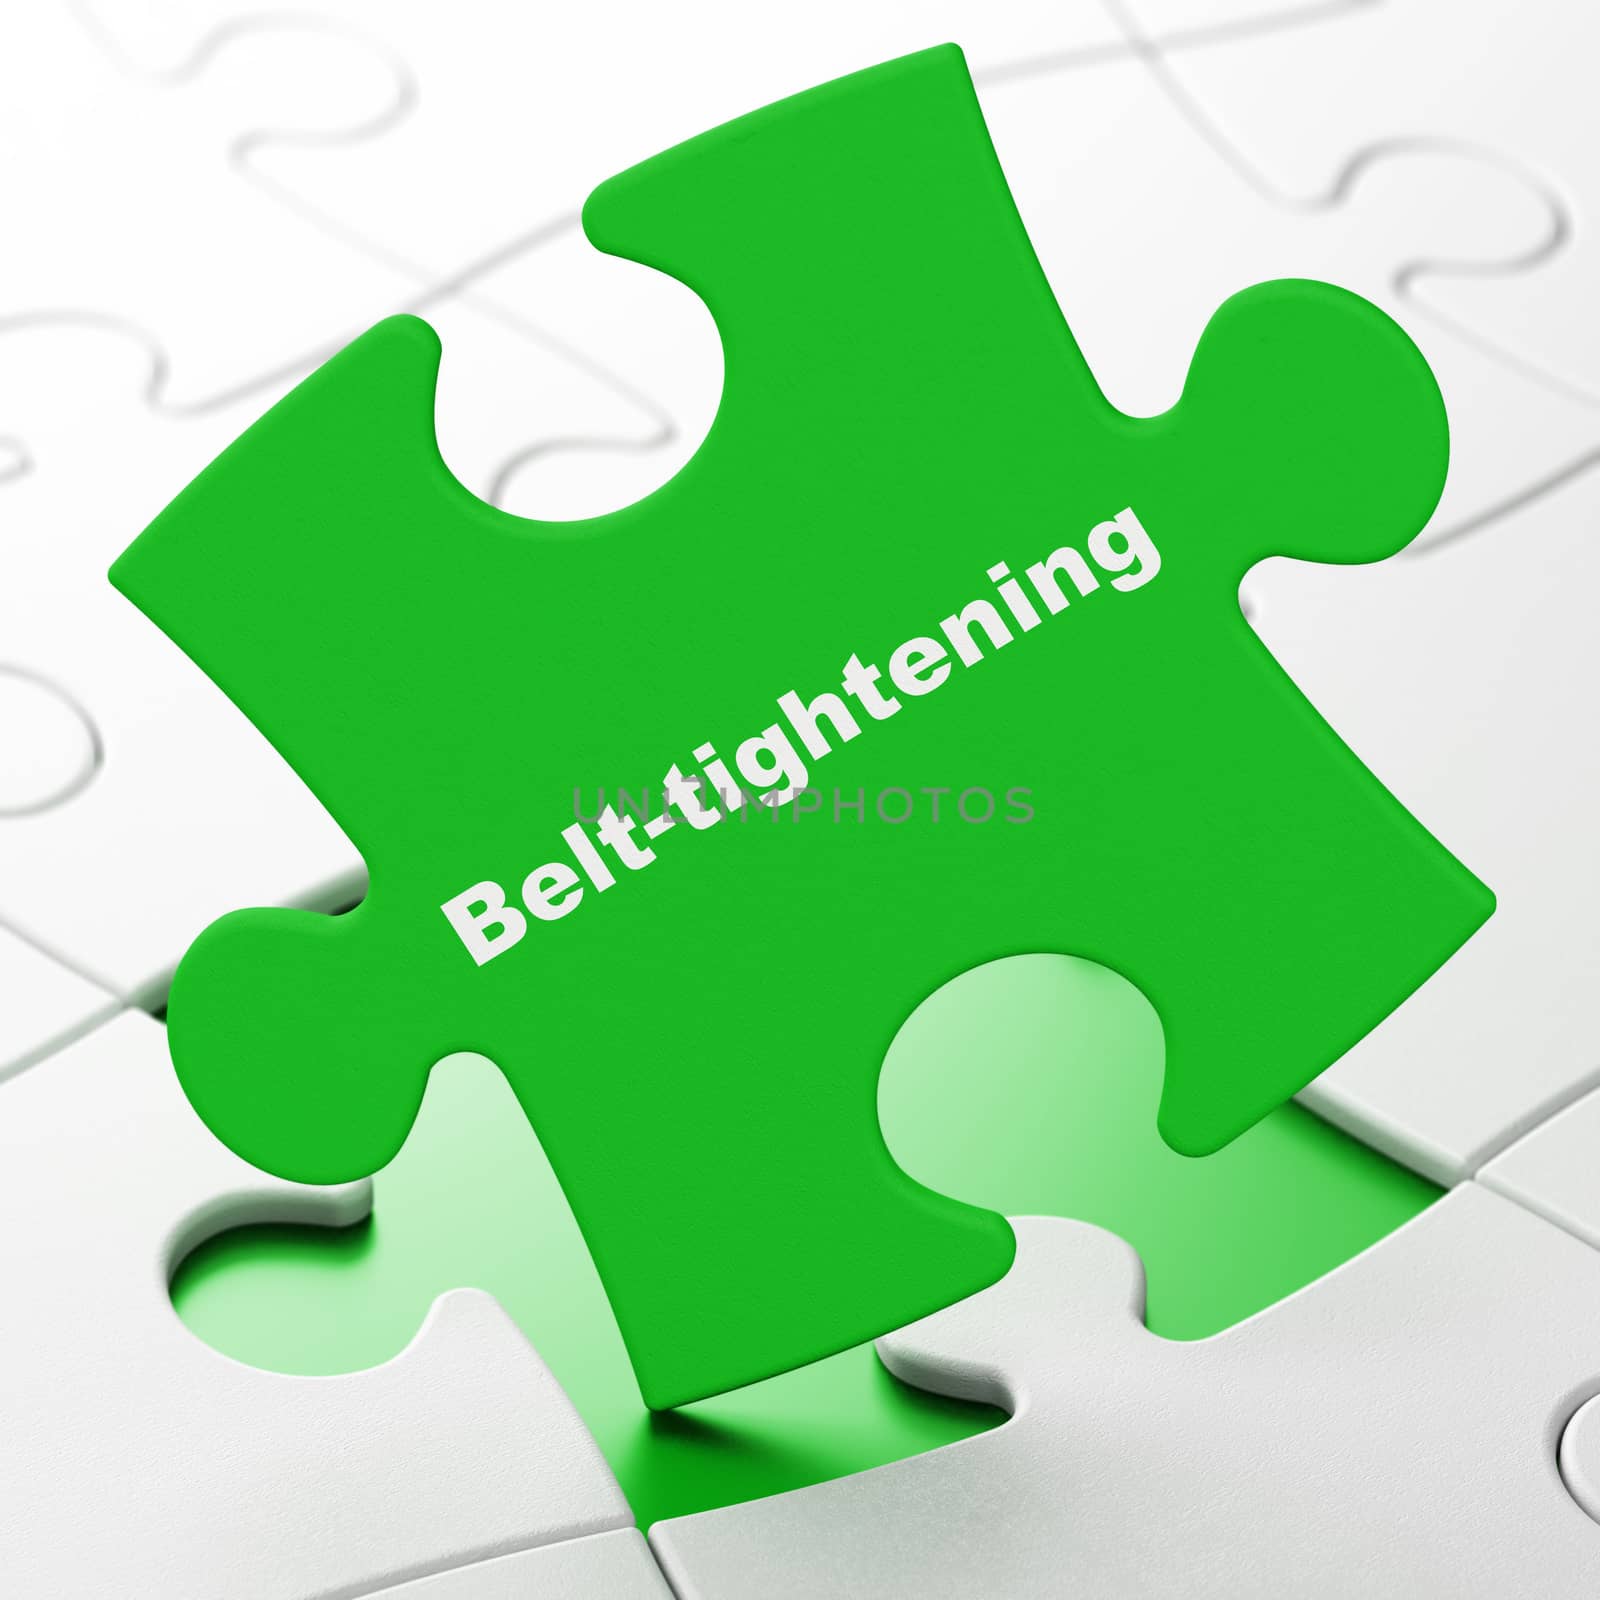 Business concept: Belt-tightening on Green puzzle pieces background, 3D rendering